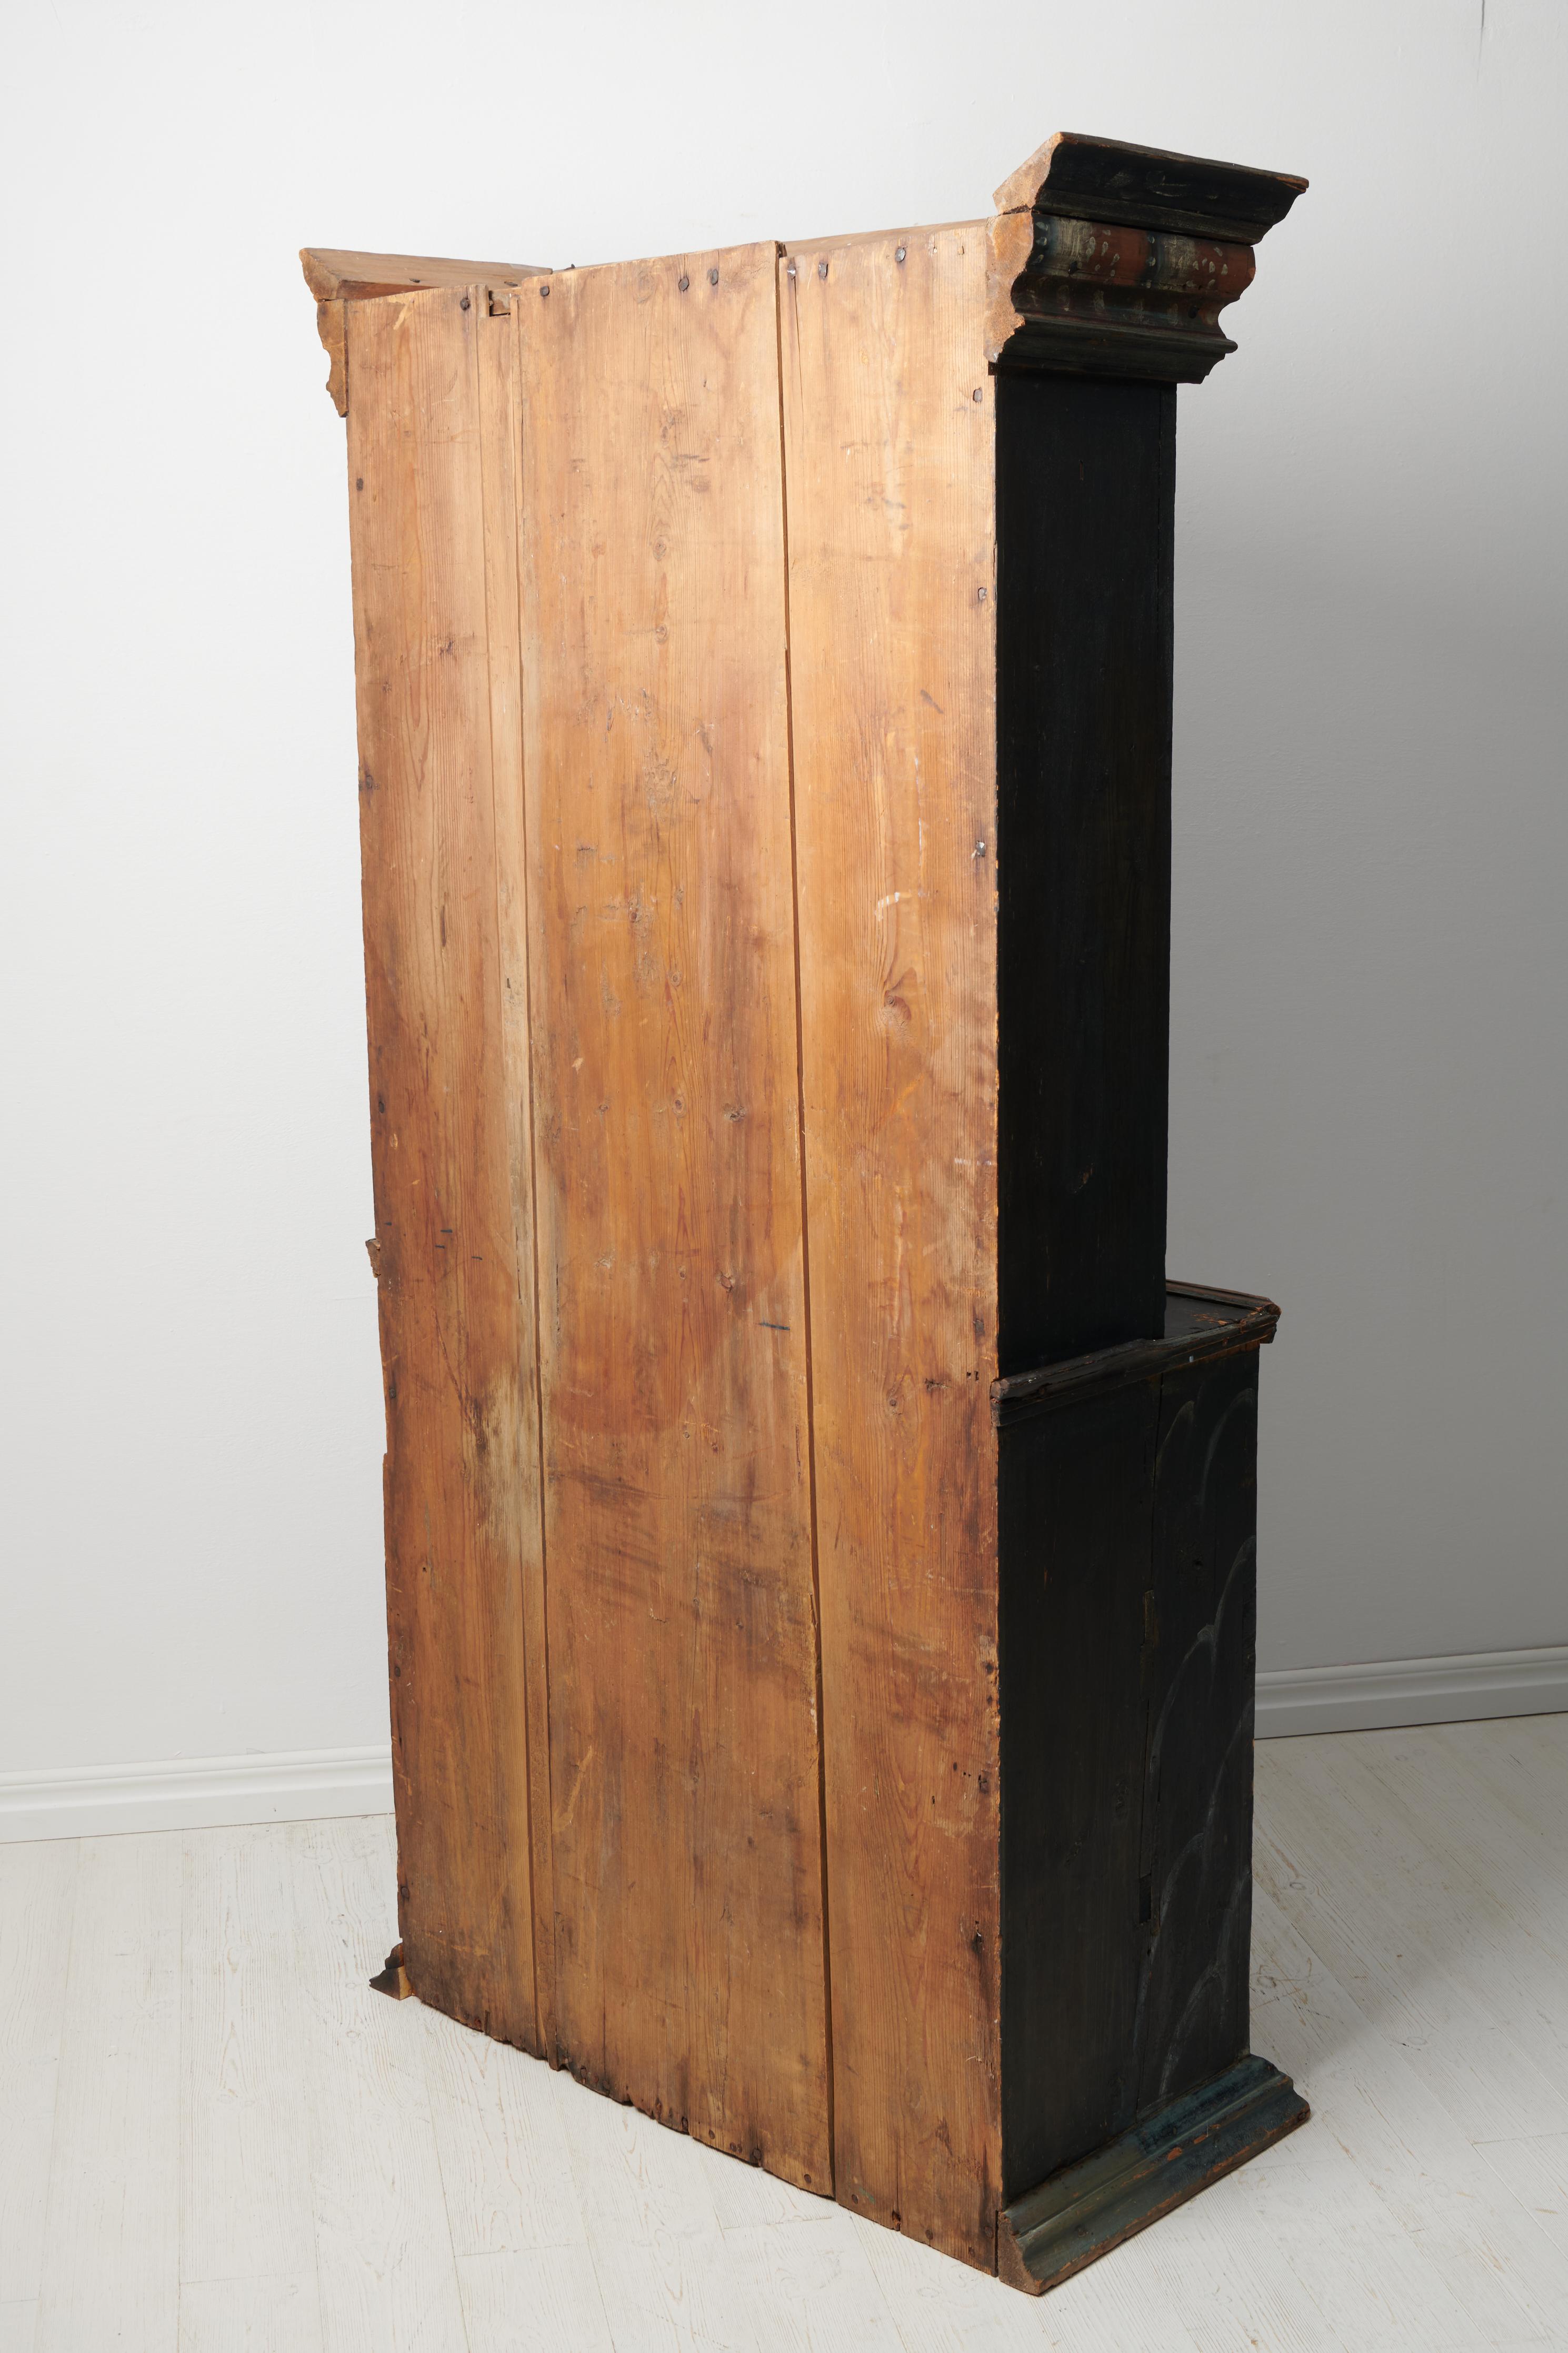 Rare Antique Handcrafted Swedish Tall Black Painted Pine Folk Art Cabinet For Sale 15